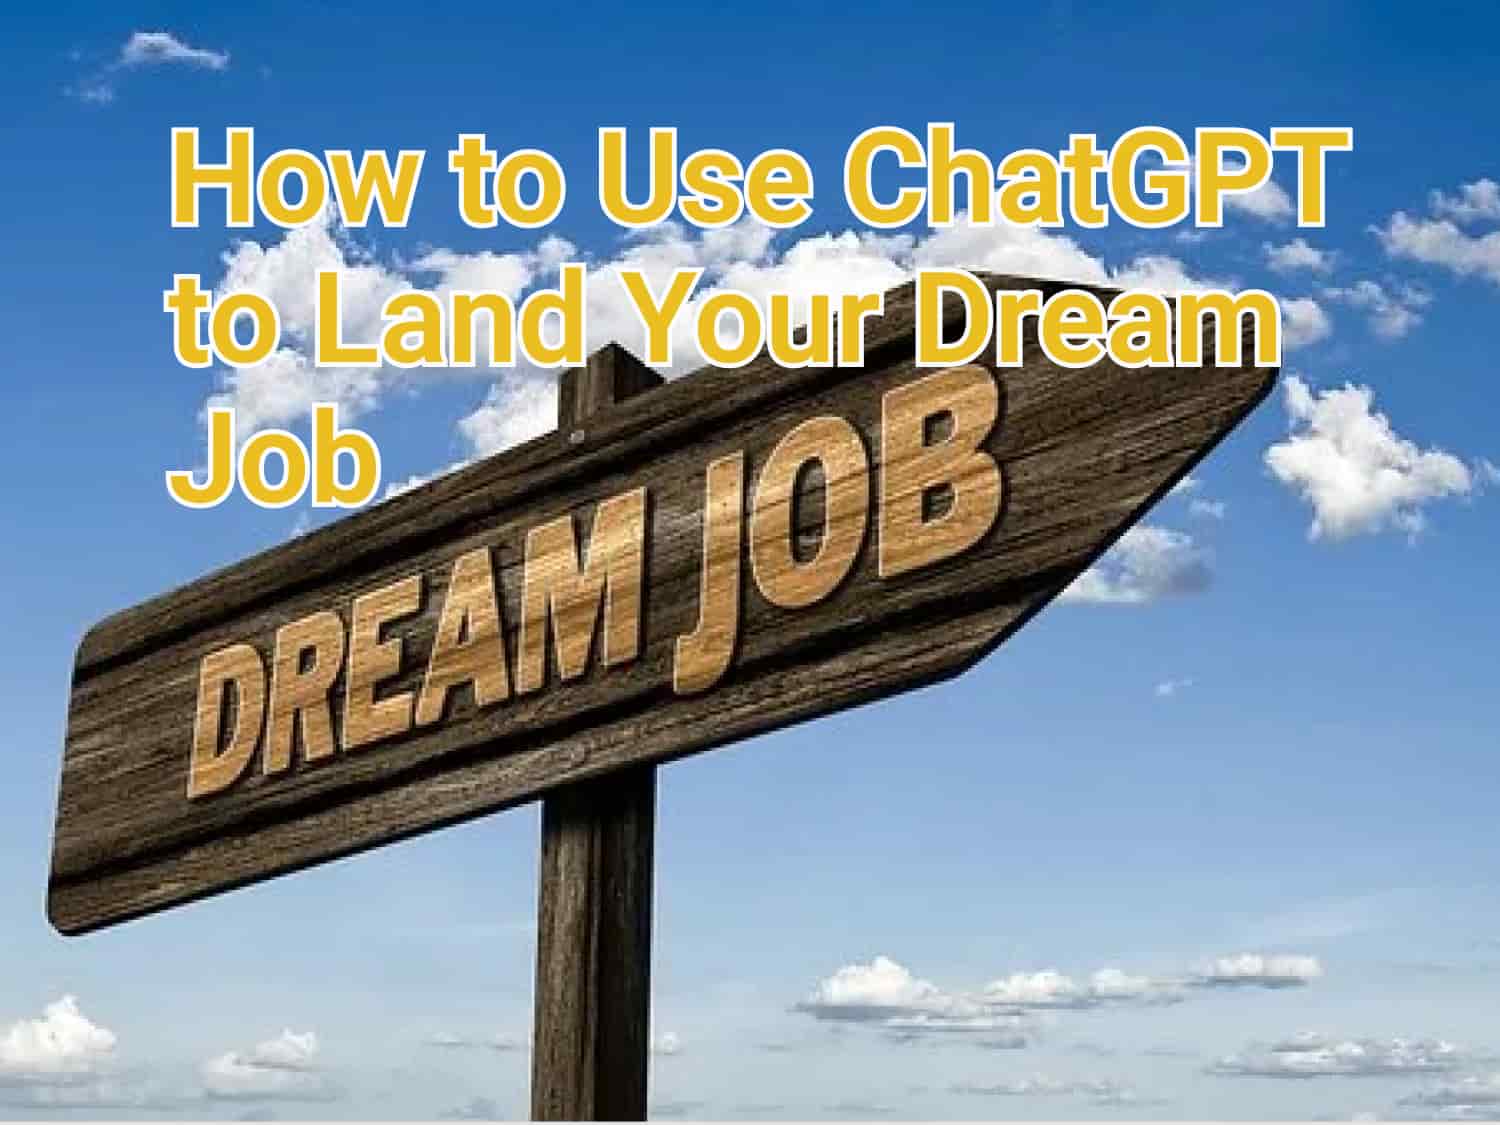 How to use ChatGPT fo job search to land your dream job